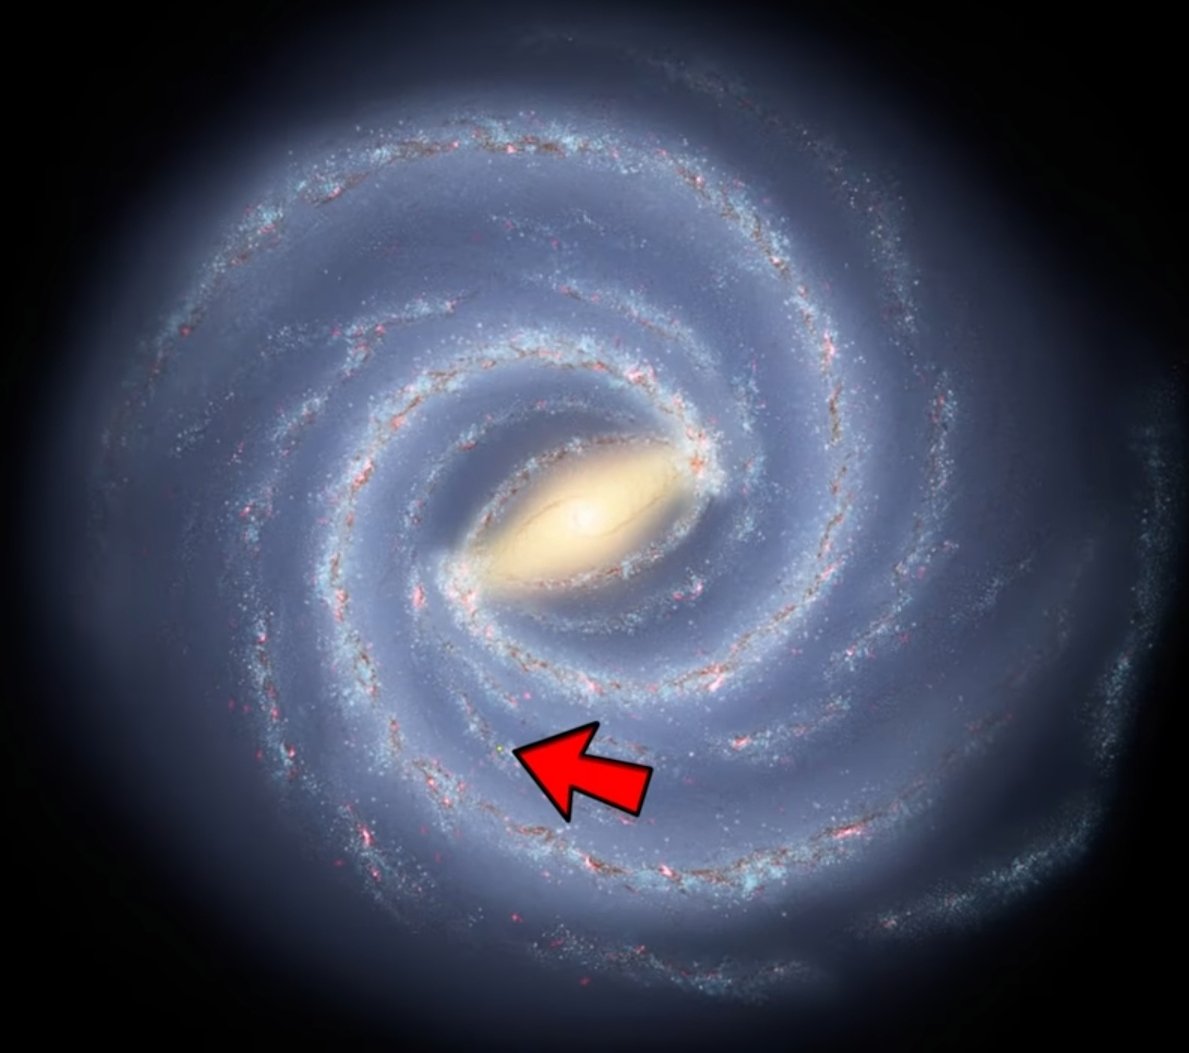 This is our entire Milky Way Galaxy and you can see where our planet is located. The tiny yellow dot is the furthest extent of human radio signals meaning that any possible Aliens living outside of that range are totally unaware that we even exist.